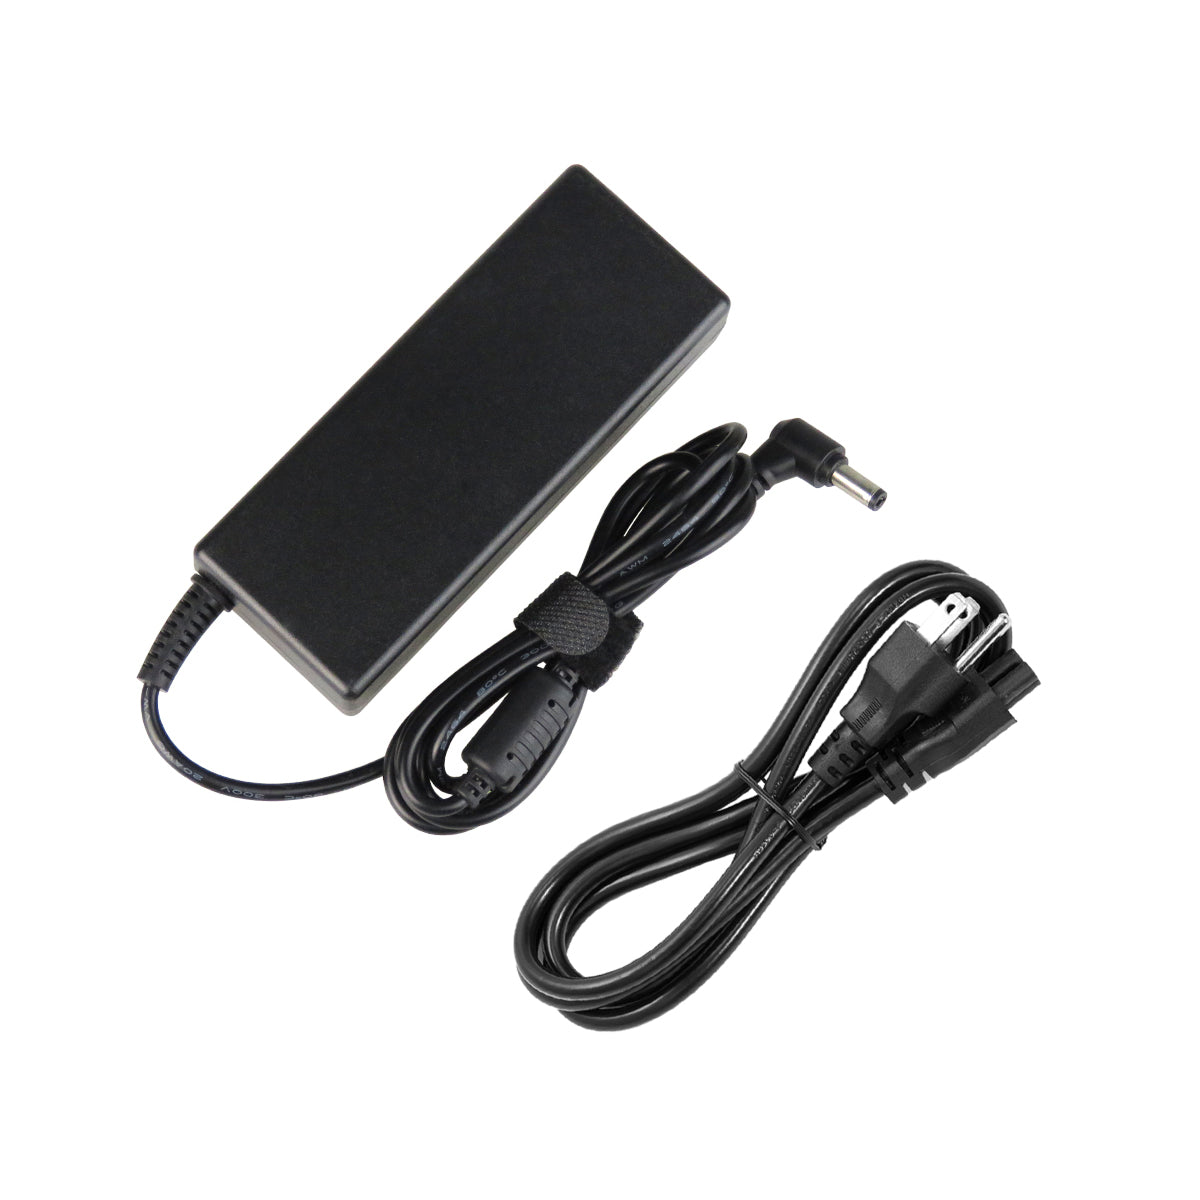 AC Adapter Charger for ASUS N76VZ Notebook.